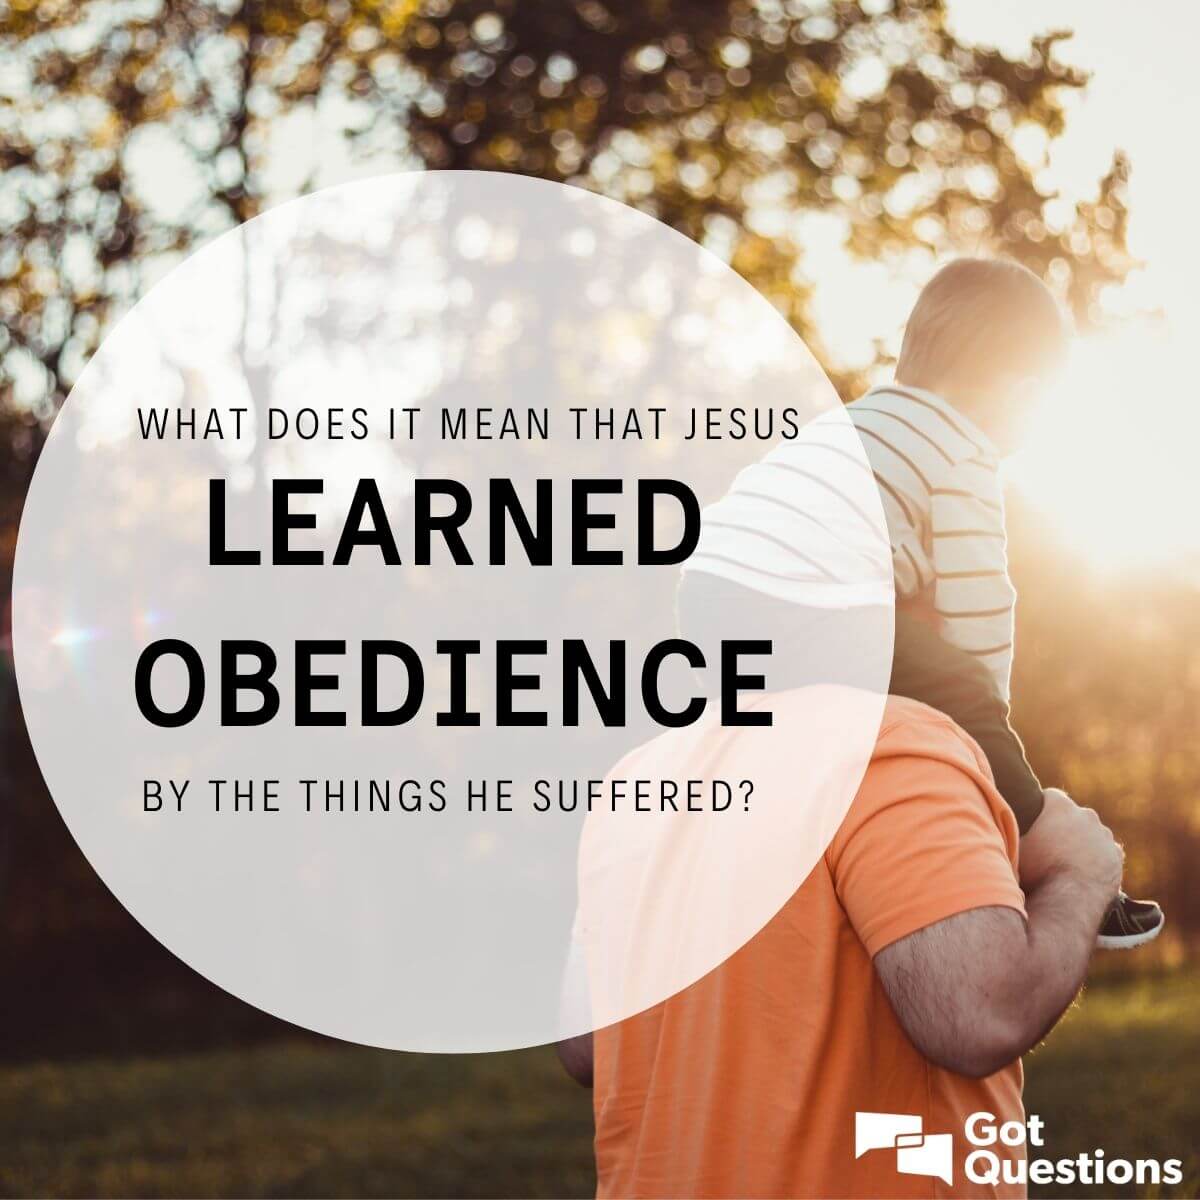 What does it mean that Jesus learned obedience by the